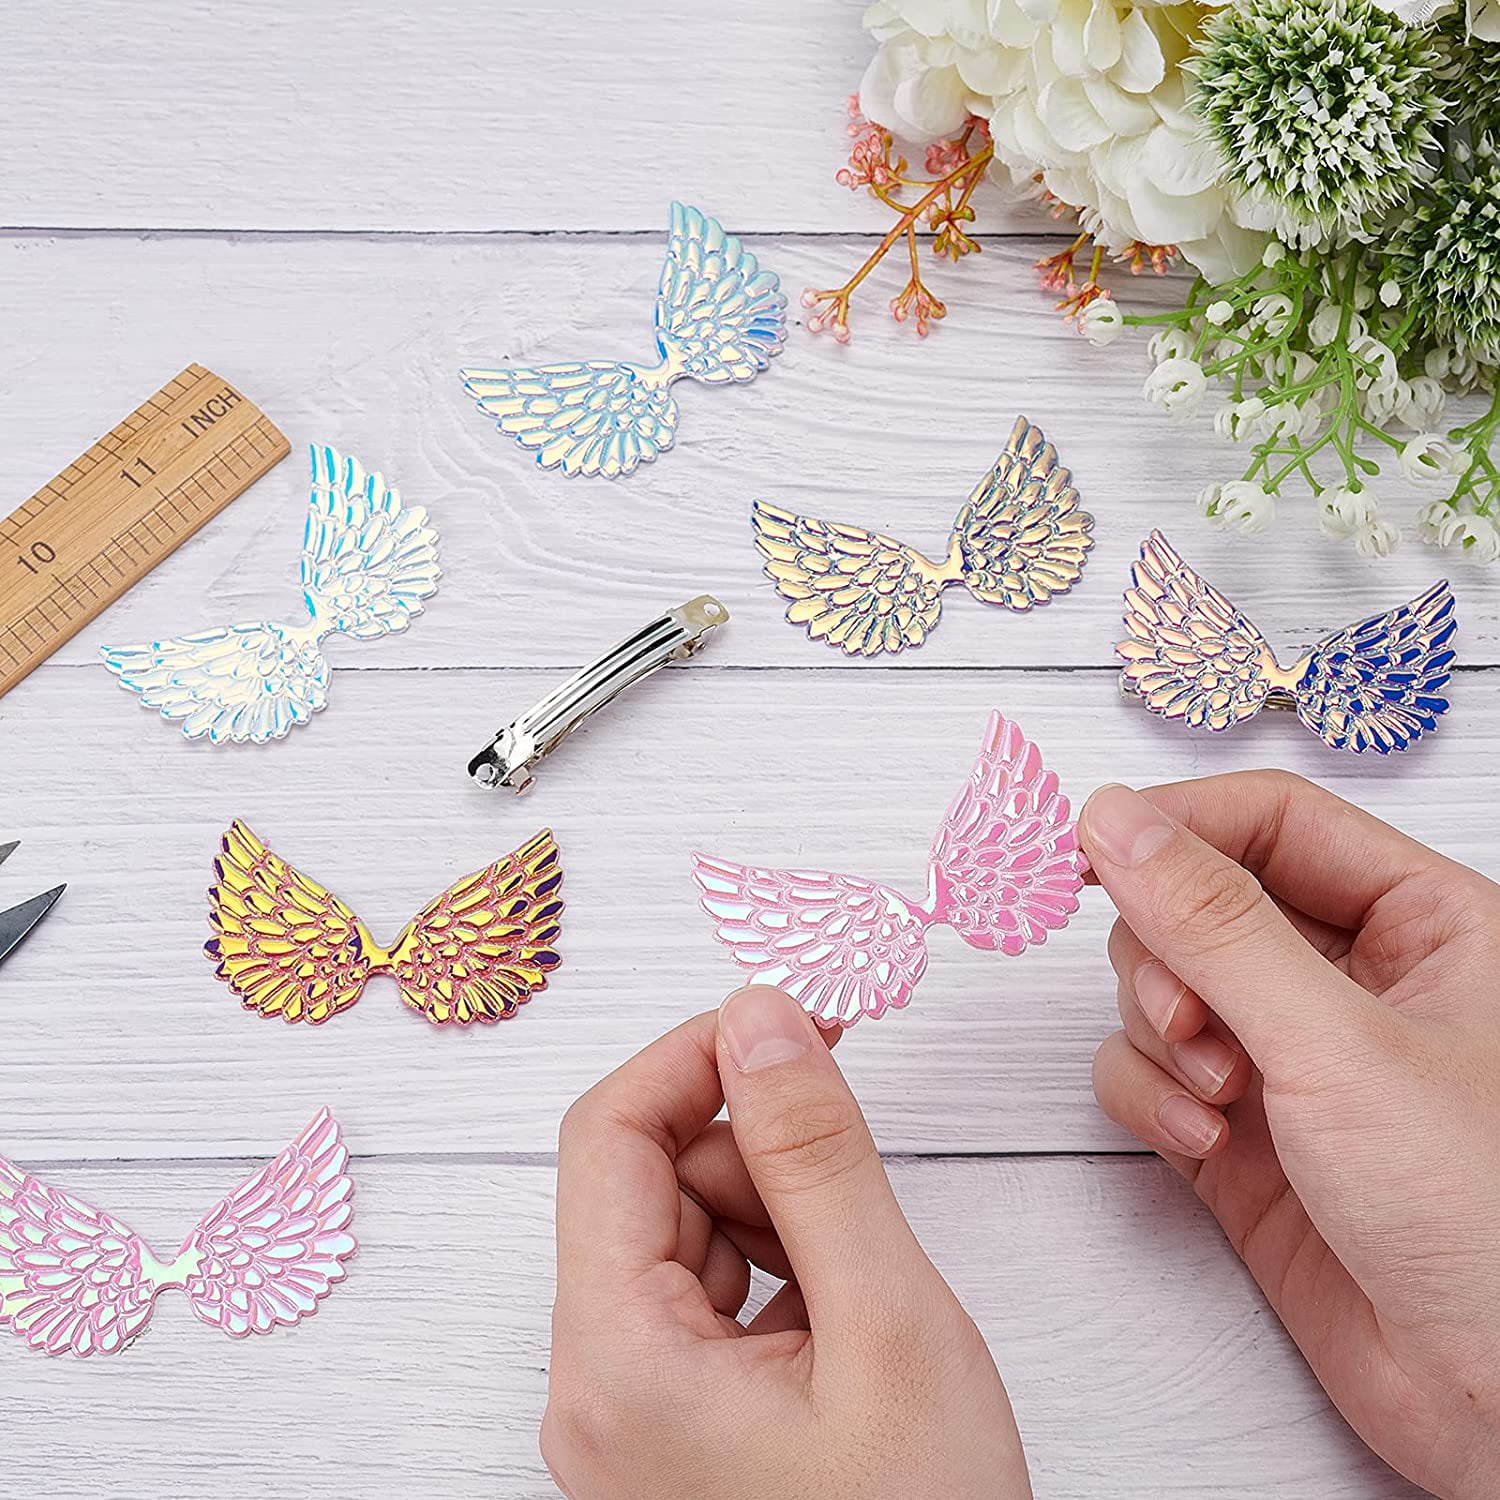 Artibetter 54 Pcs Angel Wings Accessories Mini Angel Wings for Crafts Angel  Wing Decoration Guardian Decor Sew on Patches Fairy Wings for Crafts